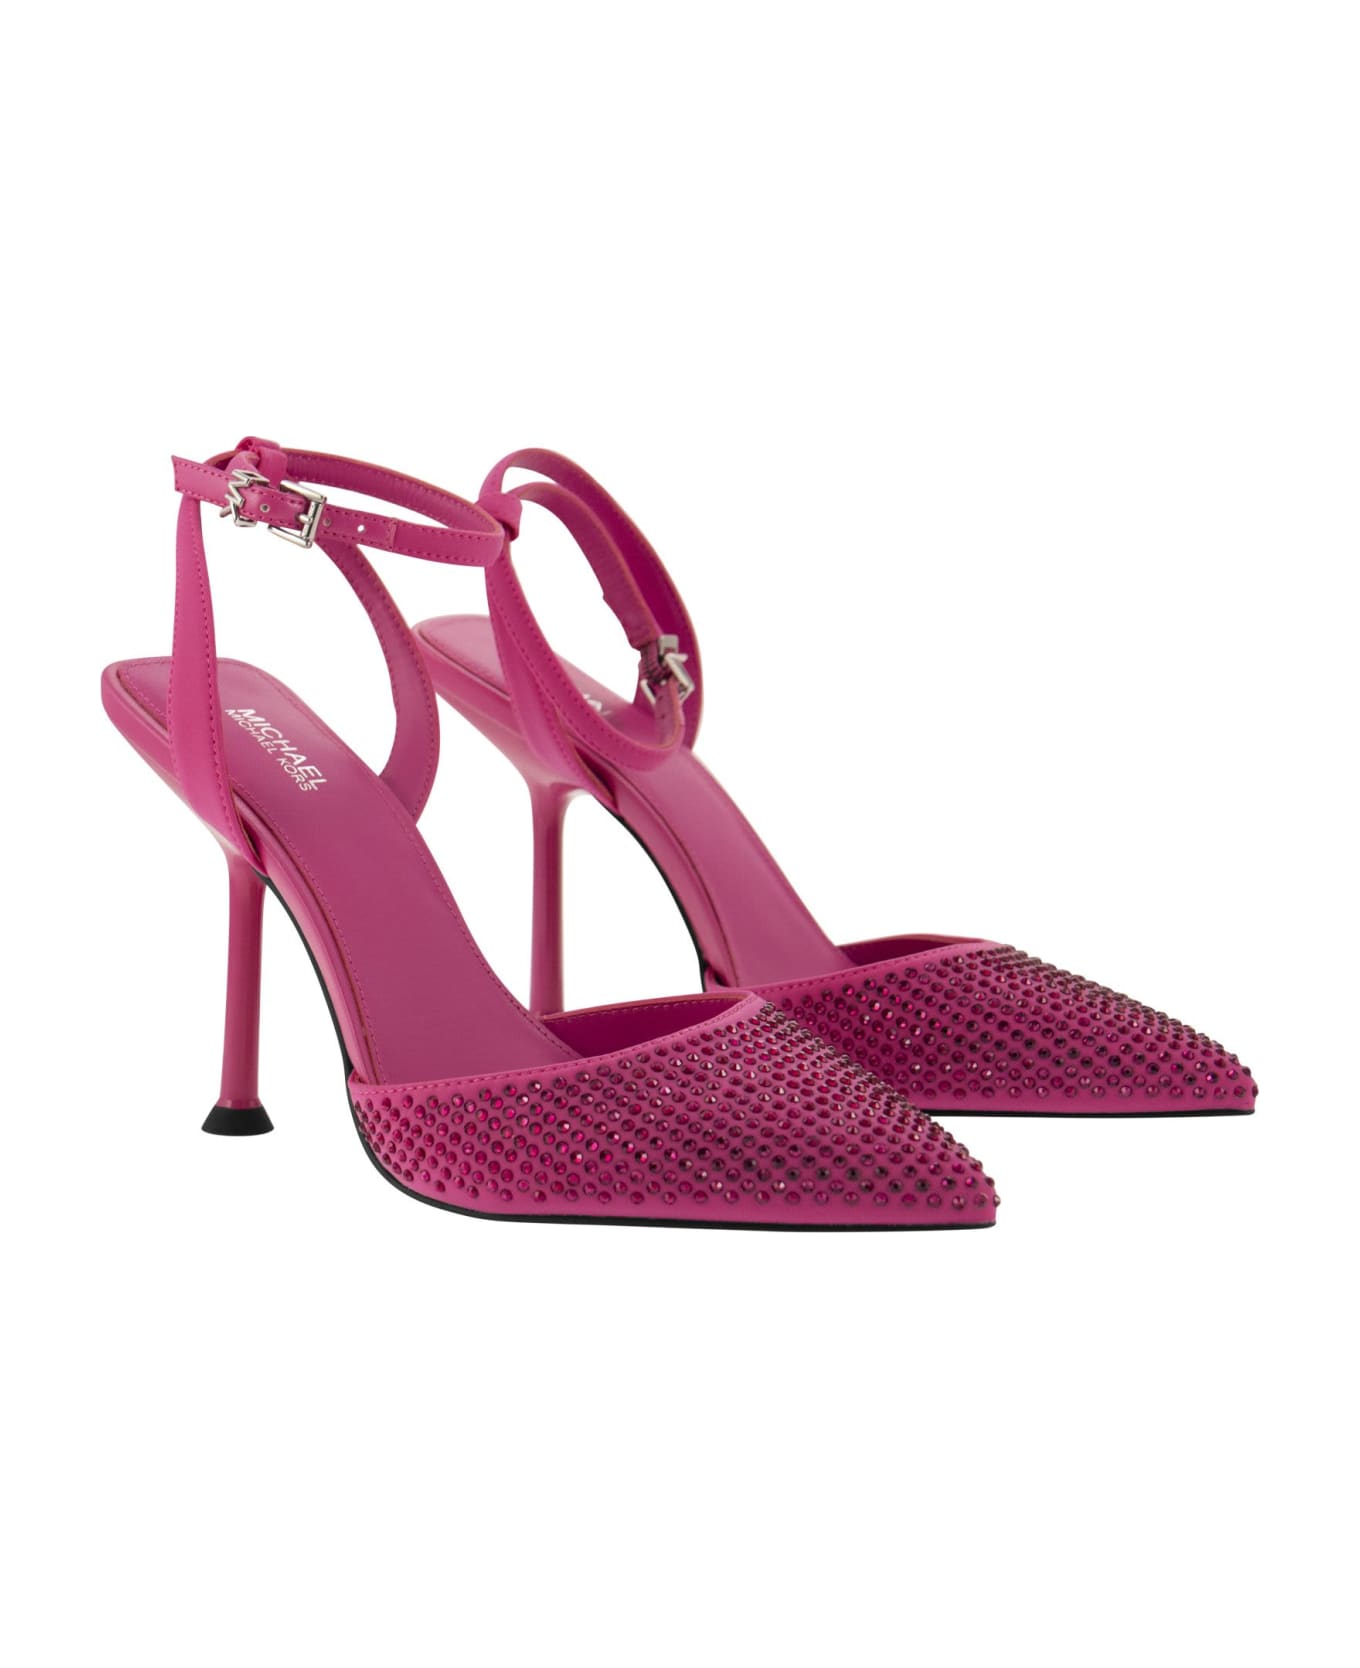 MICHAEL Michael Kors Imani Pump Pumps In Fabric With Crystals - Fucsia